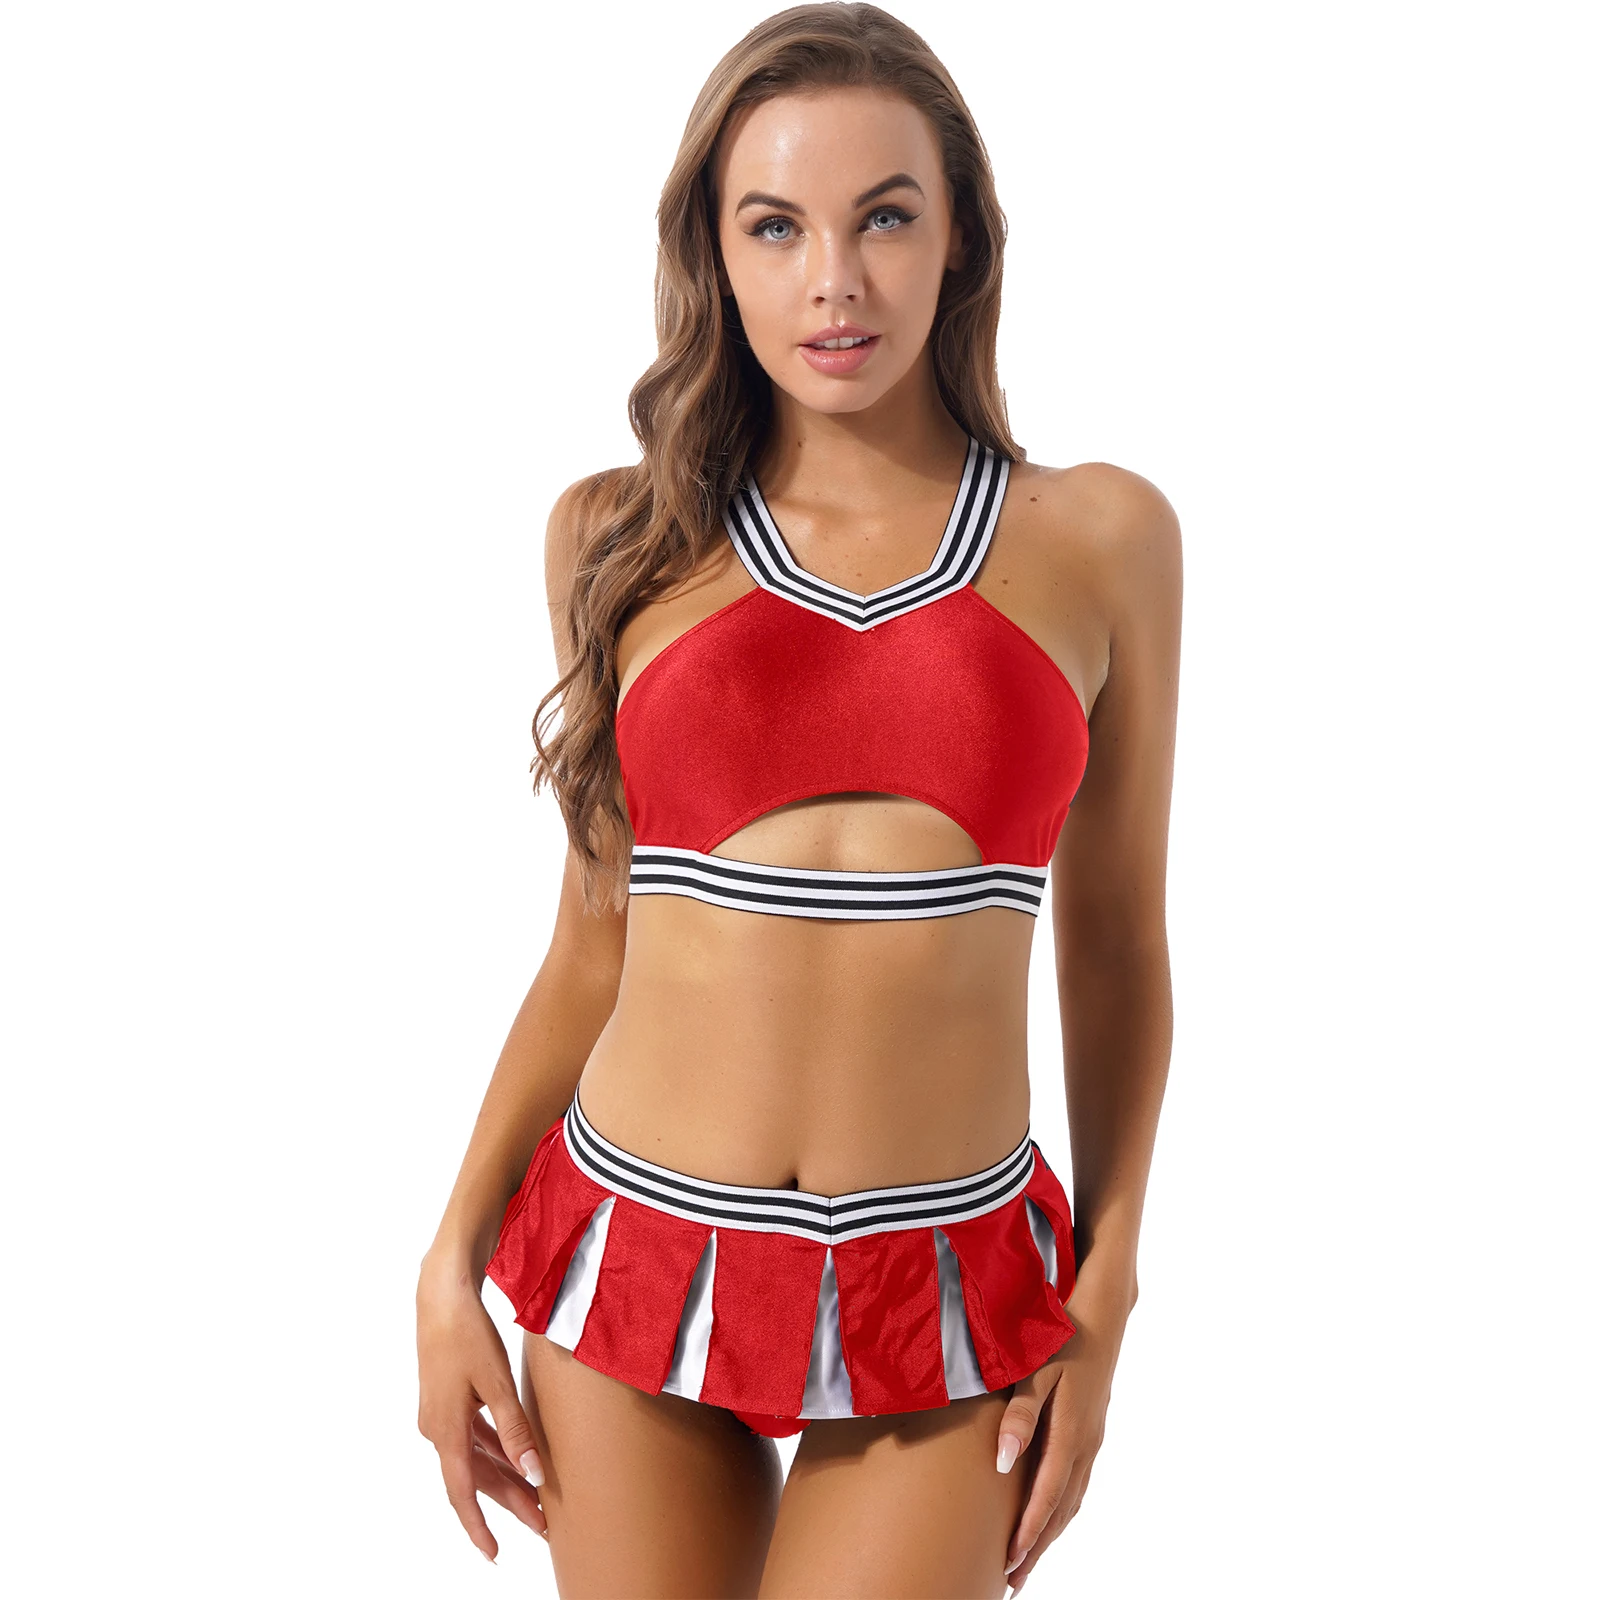 Women Cheerleading Costumes Sexy Lingerie Role Play Outfits Crop Top+ Pleat...